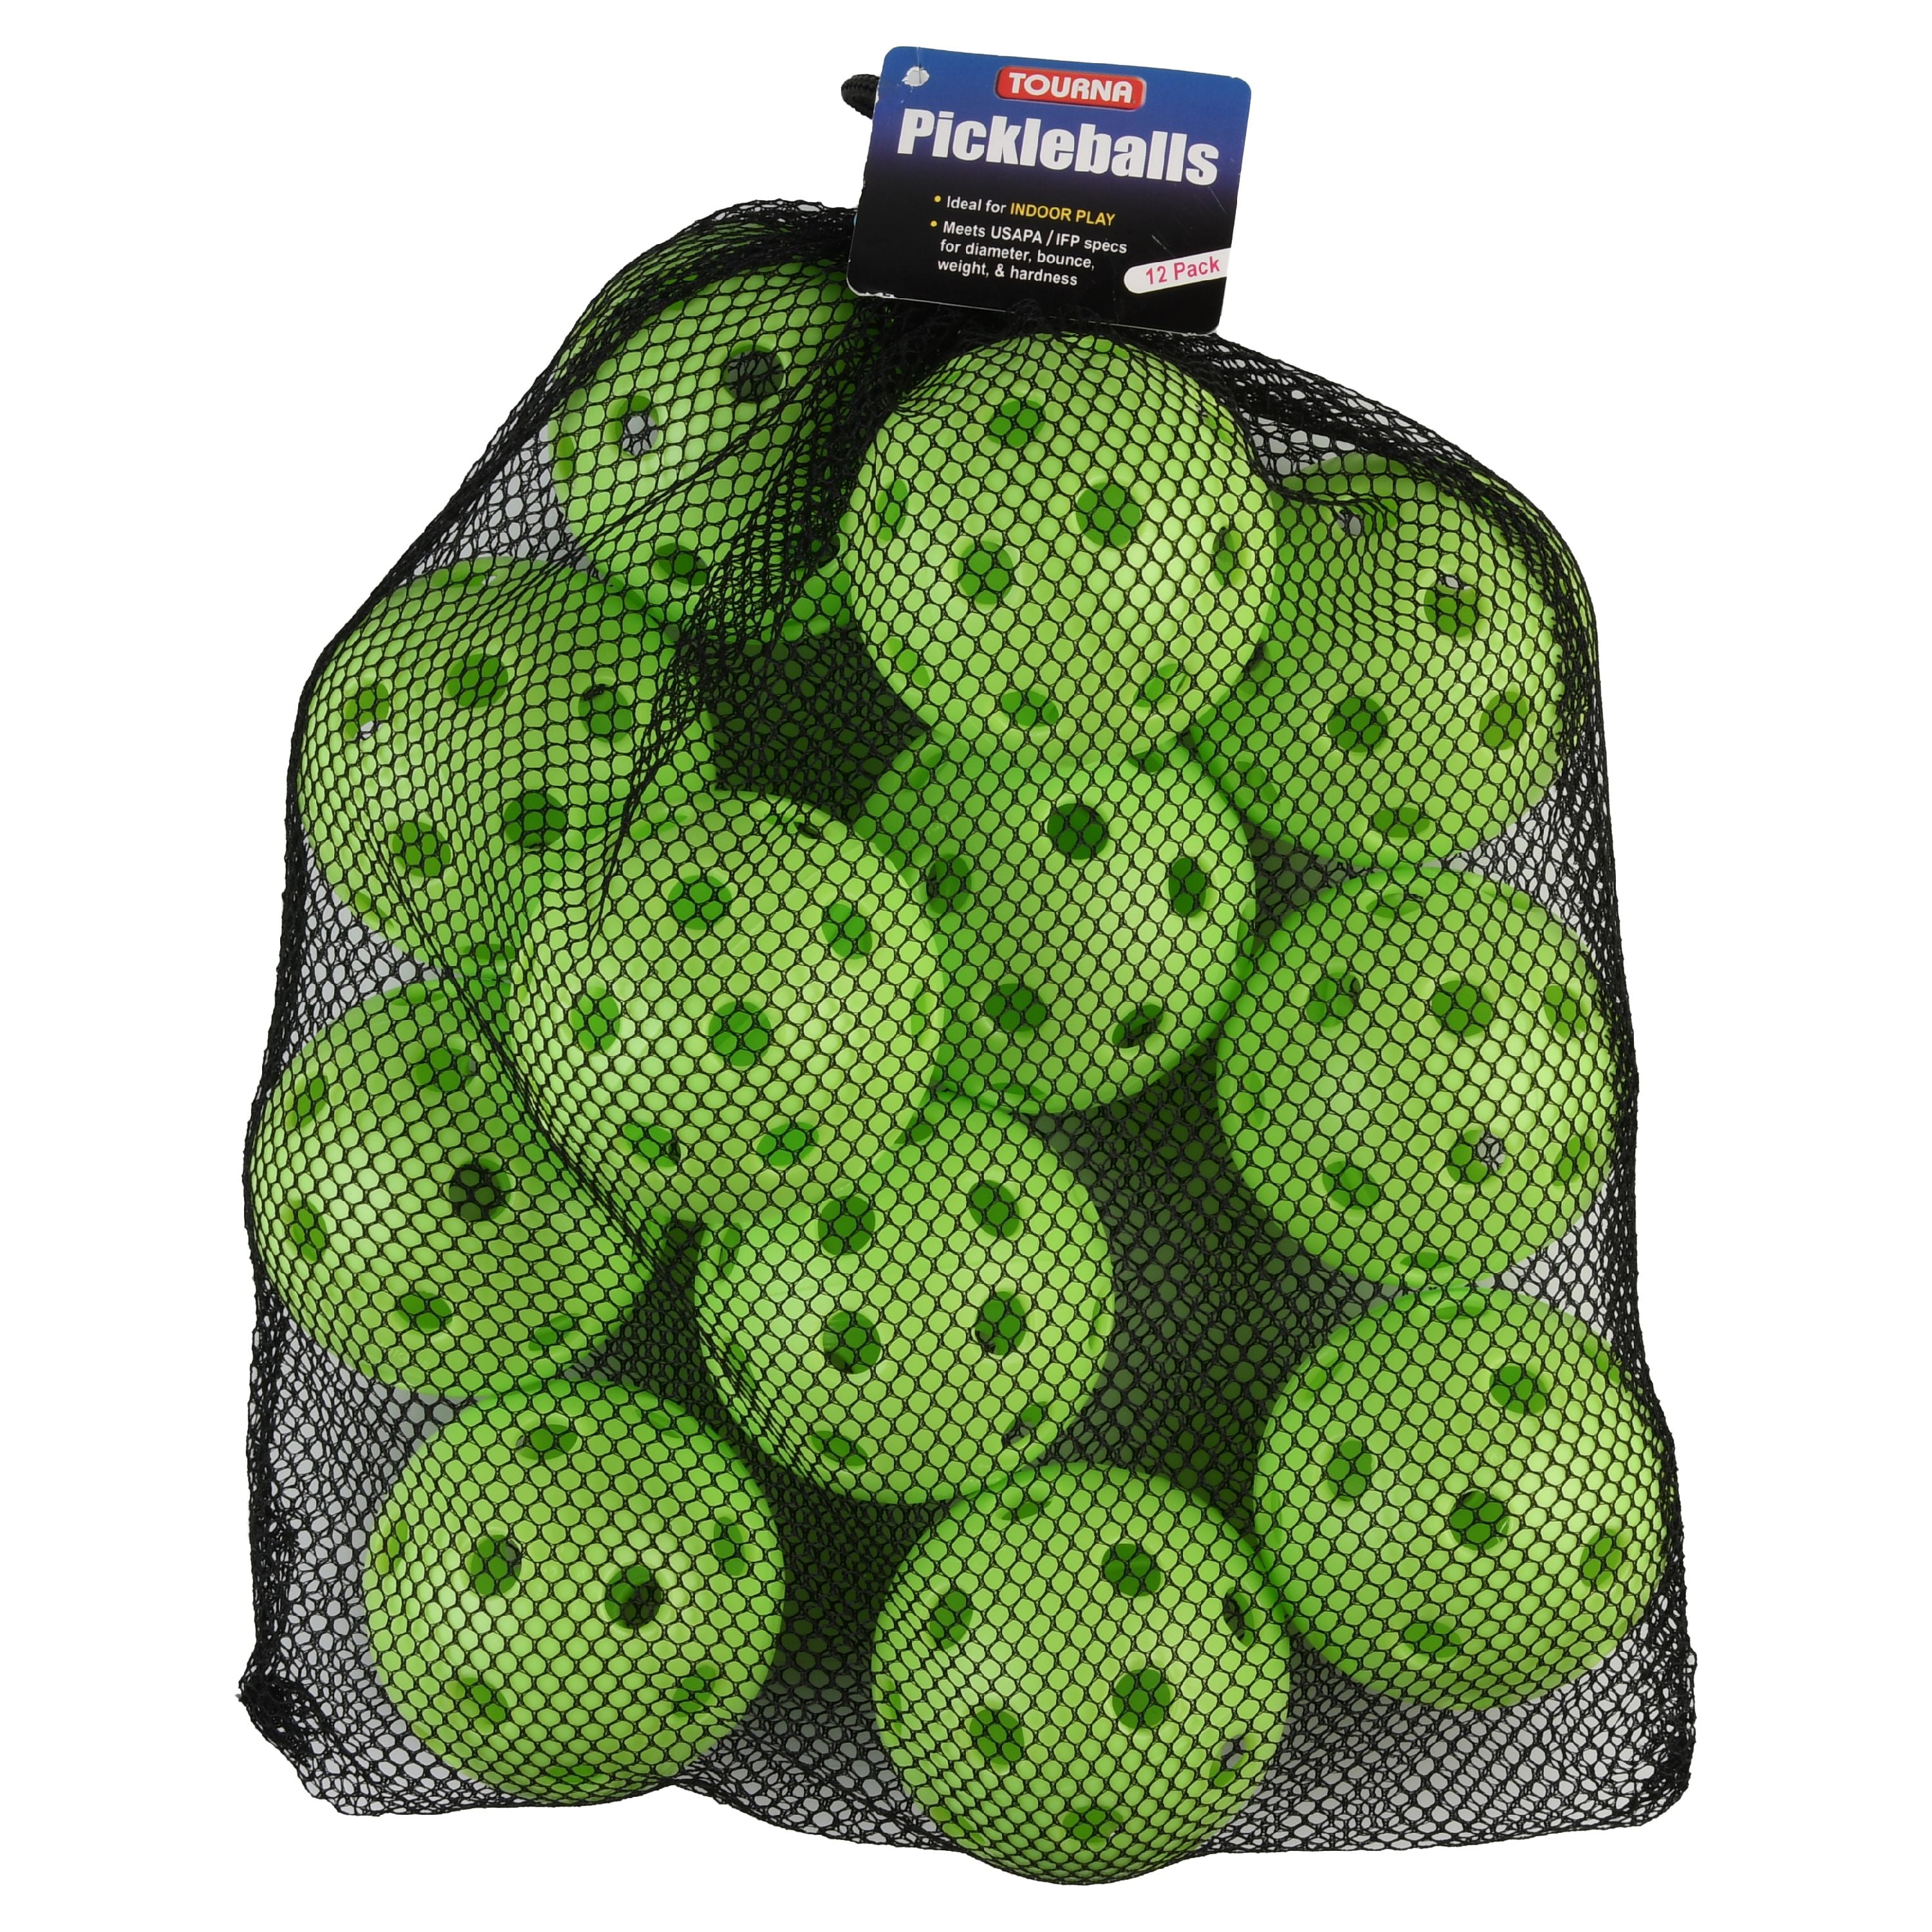 6Pcs 40 Hole High-Vis Optic Pattern Pickleball Balls For Game Practice 